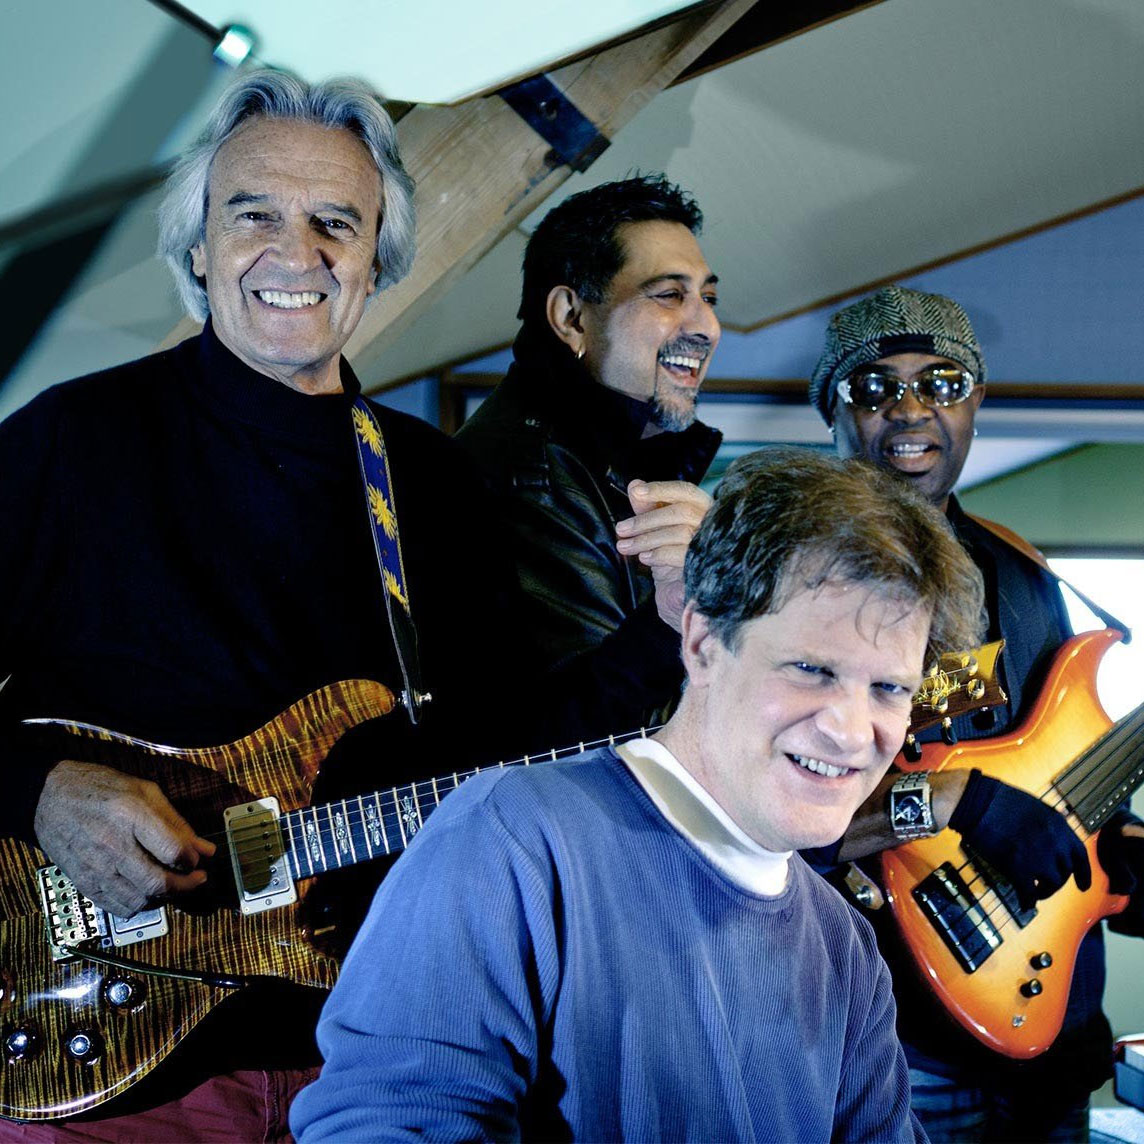 John Mclaughlin & The 4th Dimension – SOLD OUT 13/11/2014 21.00